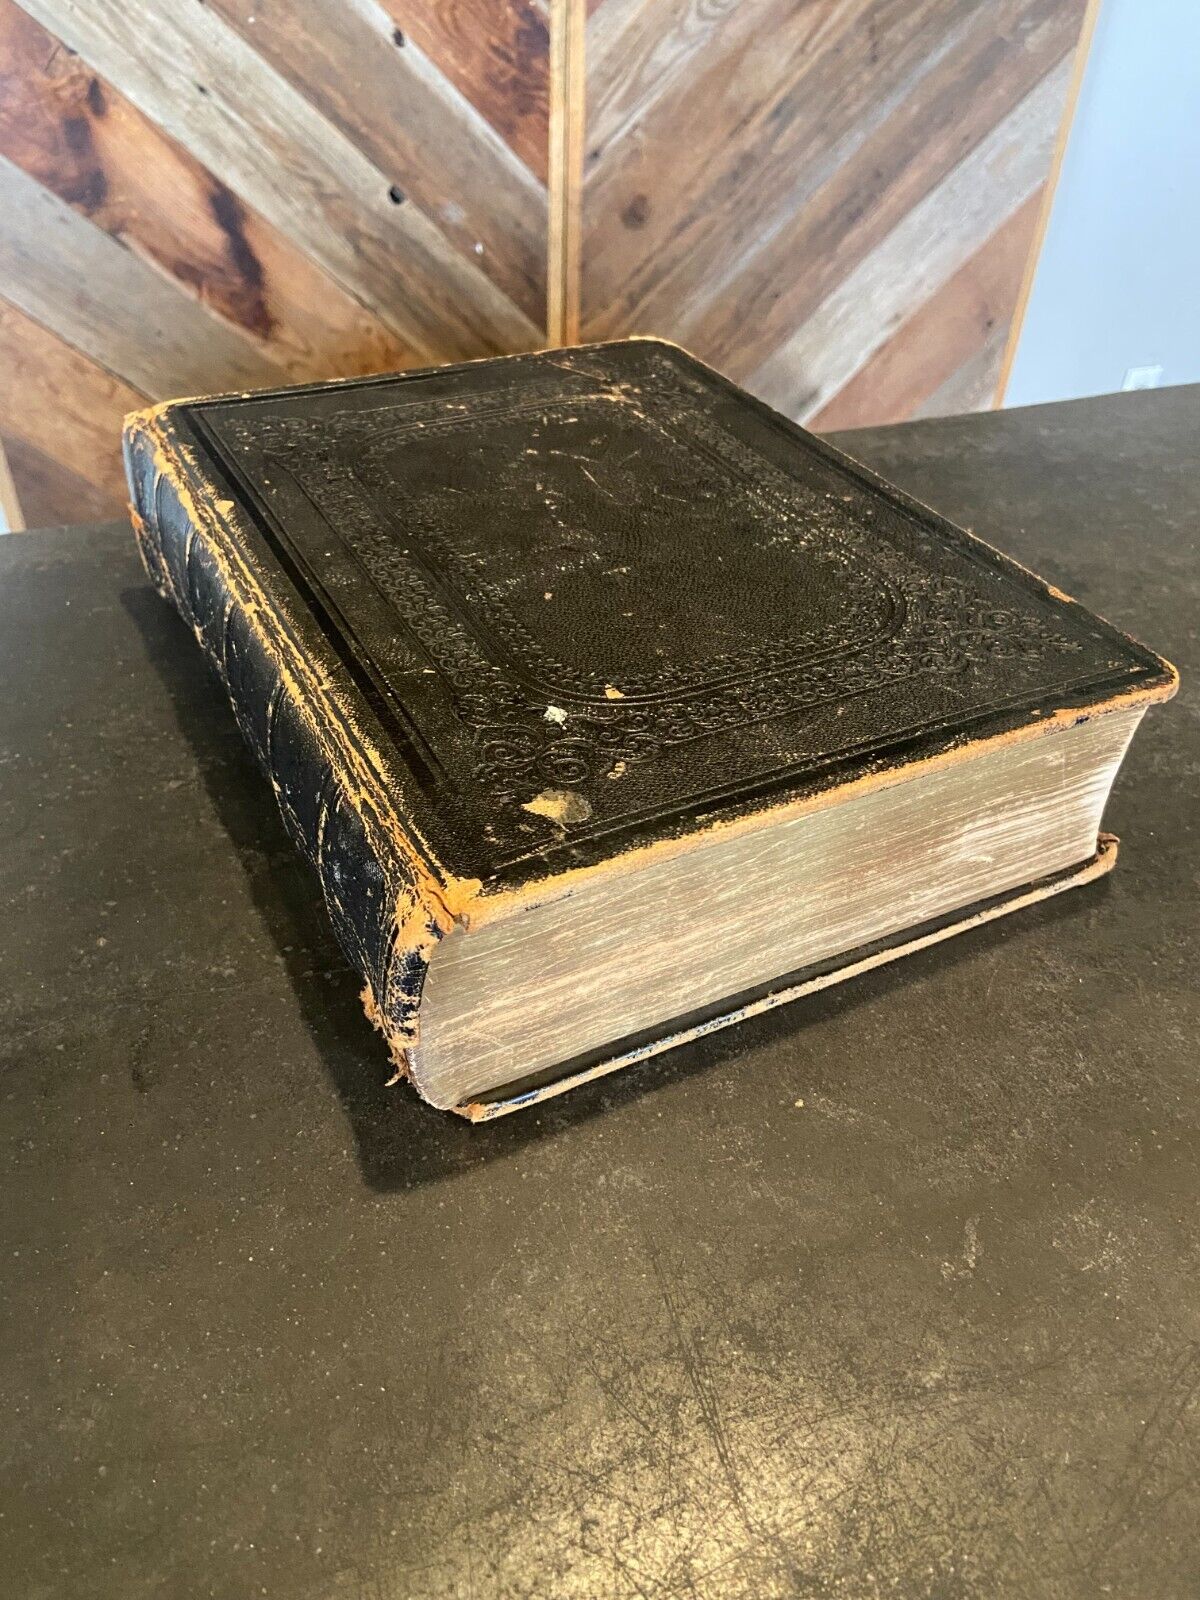 Authentic 1850's Leather-Bound Pulpit Edition Holy Bible Must-Have Collectible